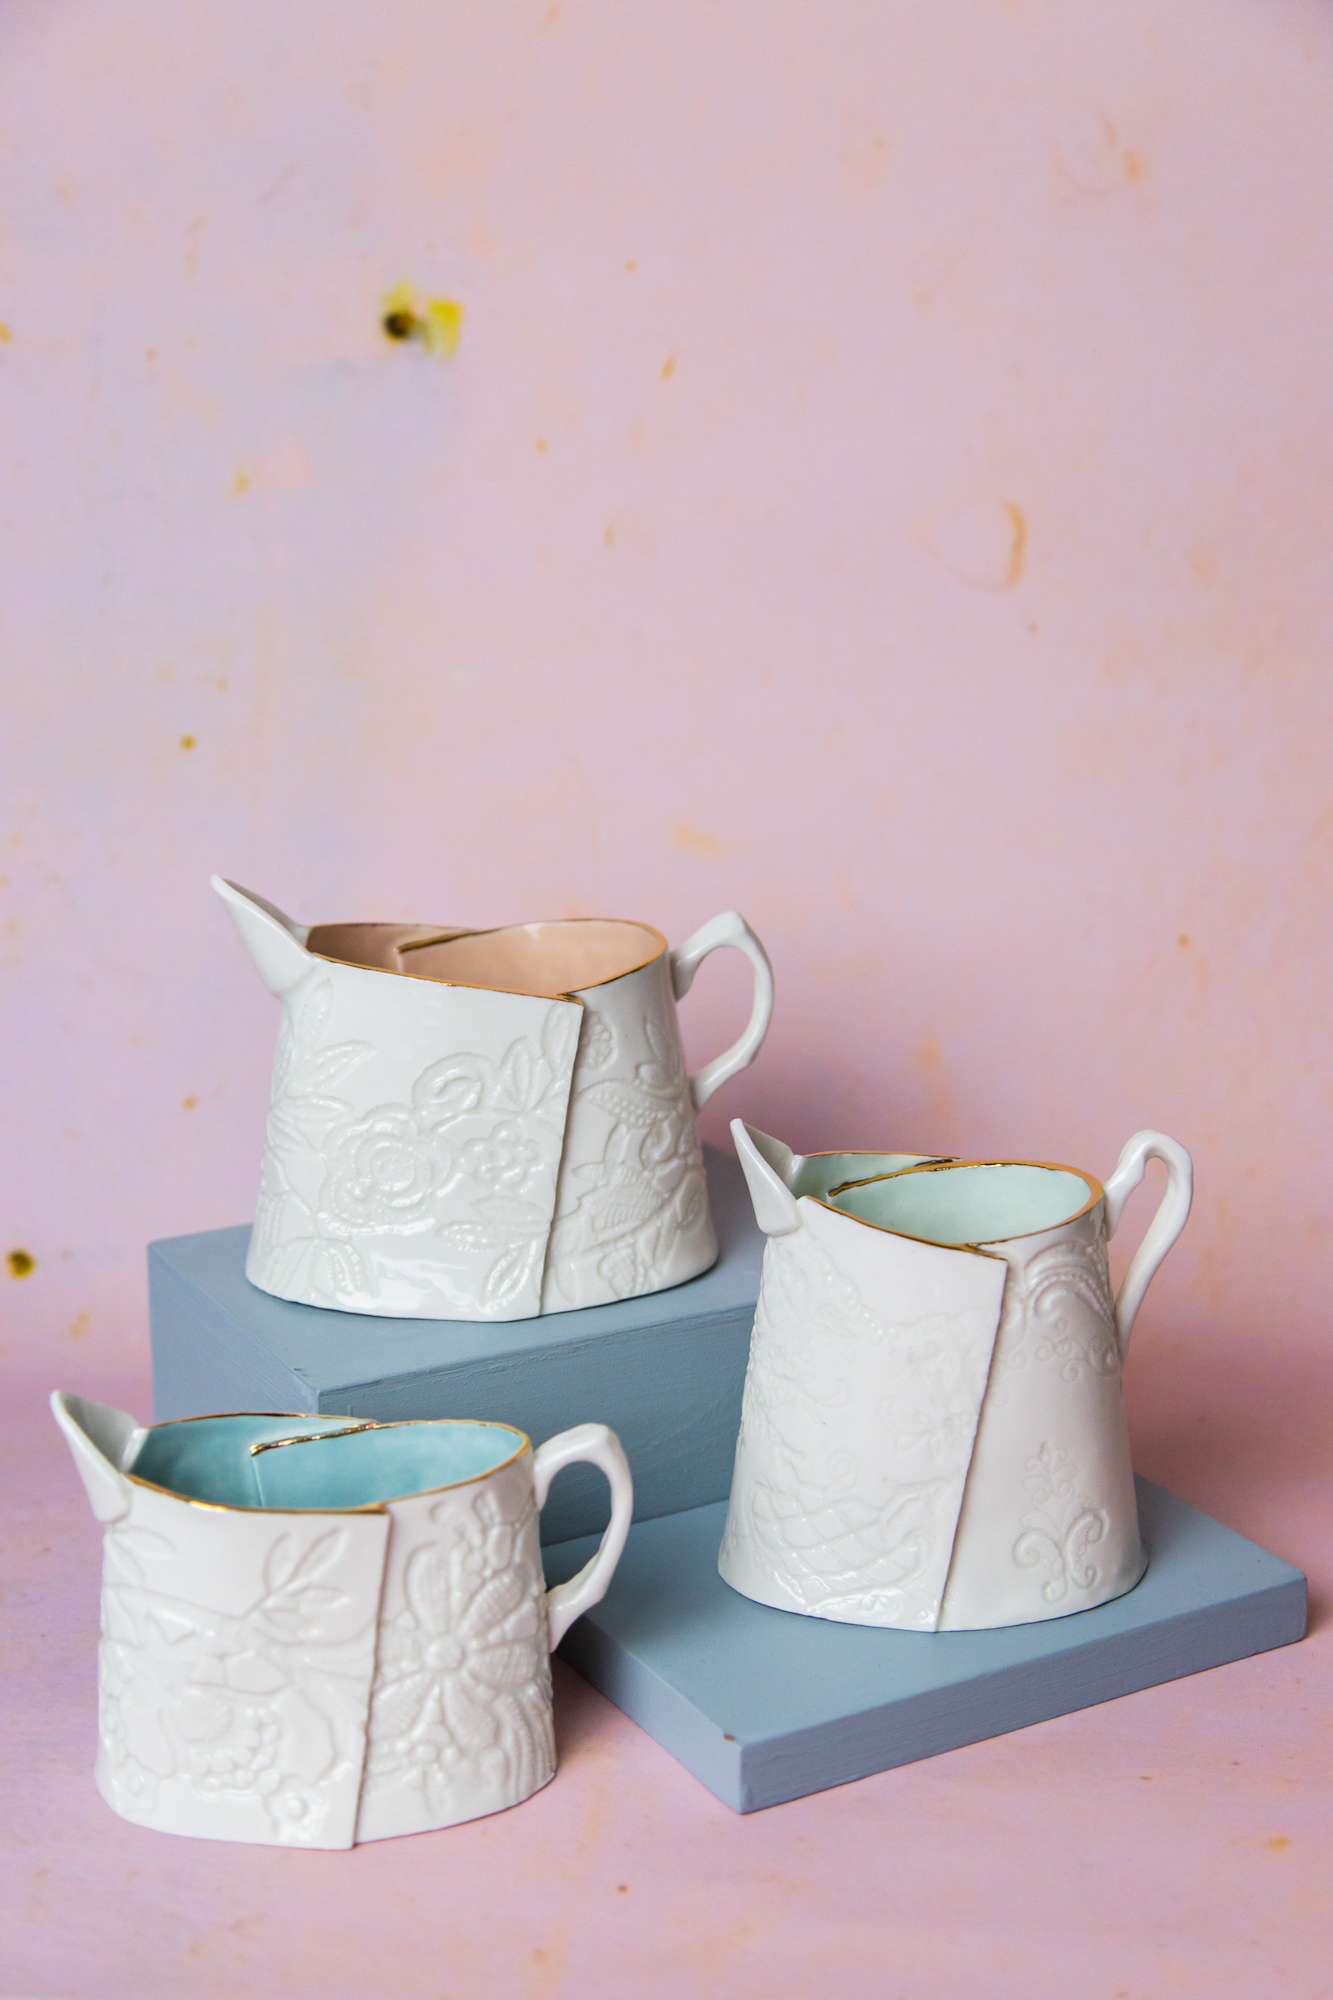 Lace Printed Jugs. Porcelain with pastel glazes and gold lustre accents. Sizes range from 10-15cm high